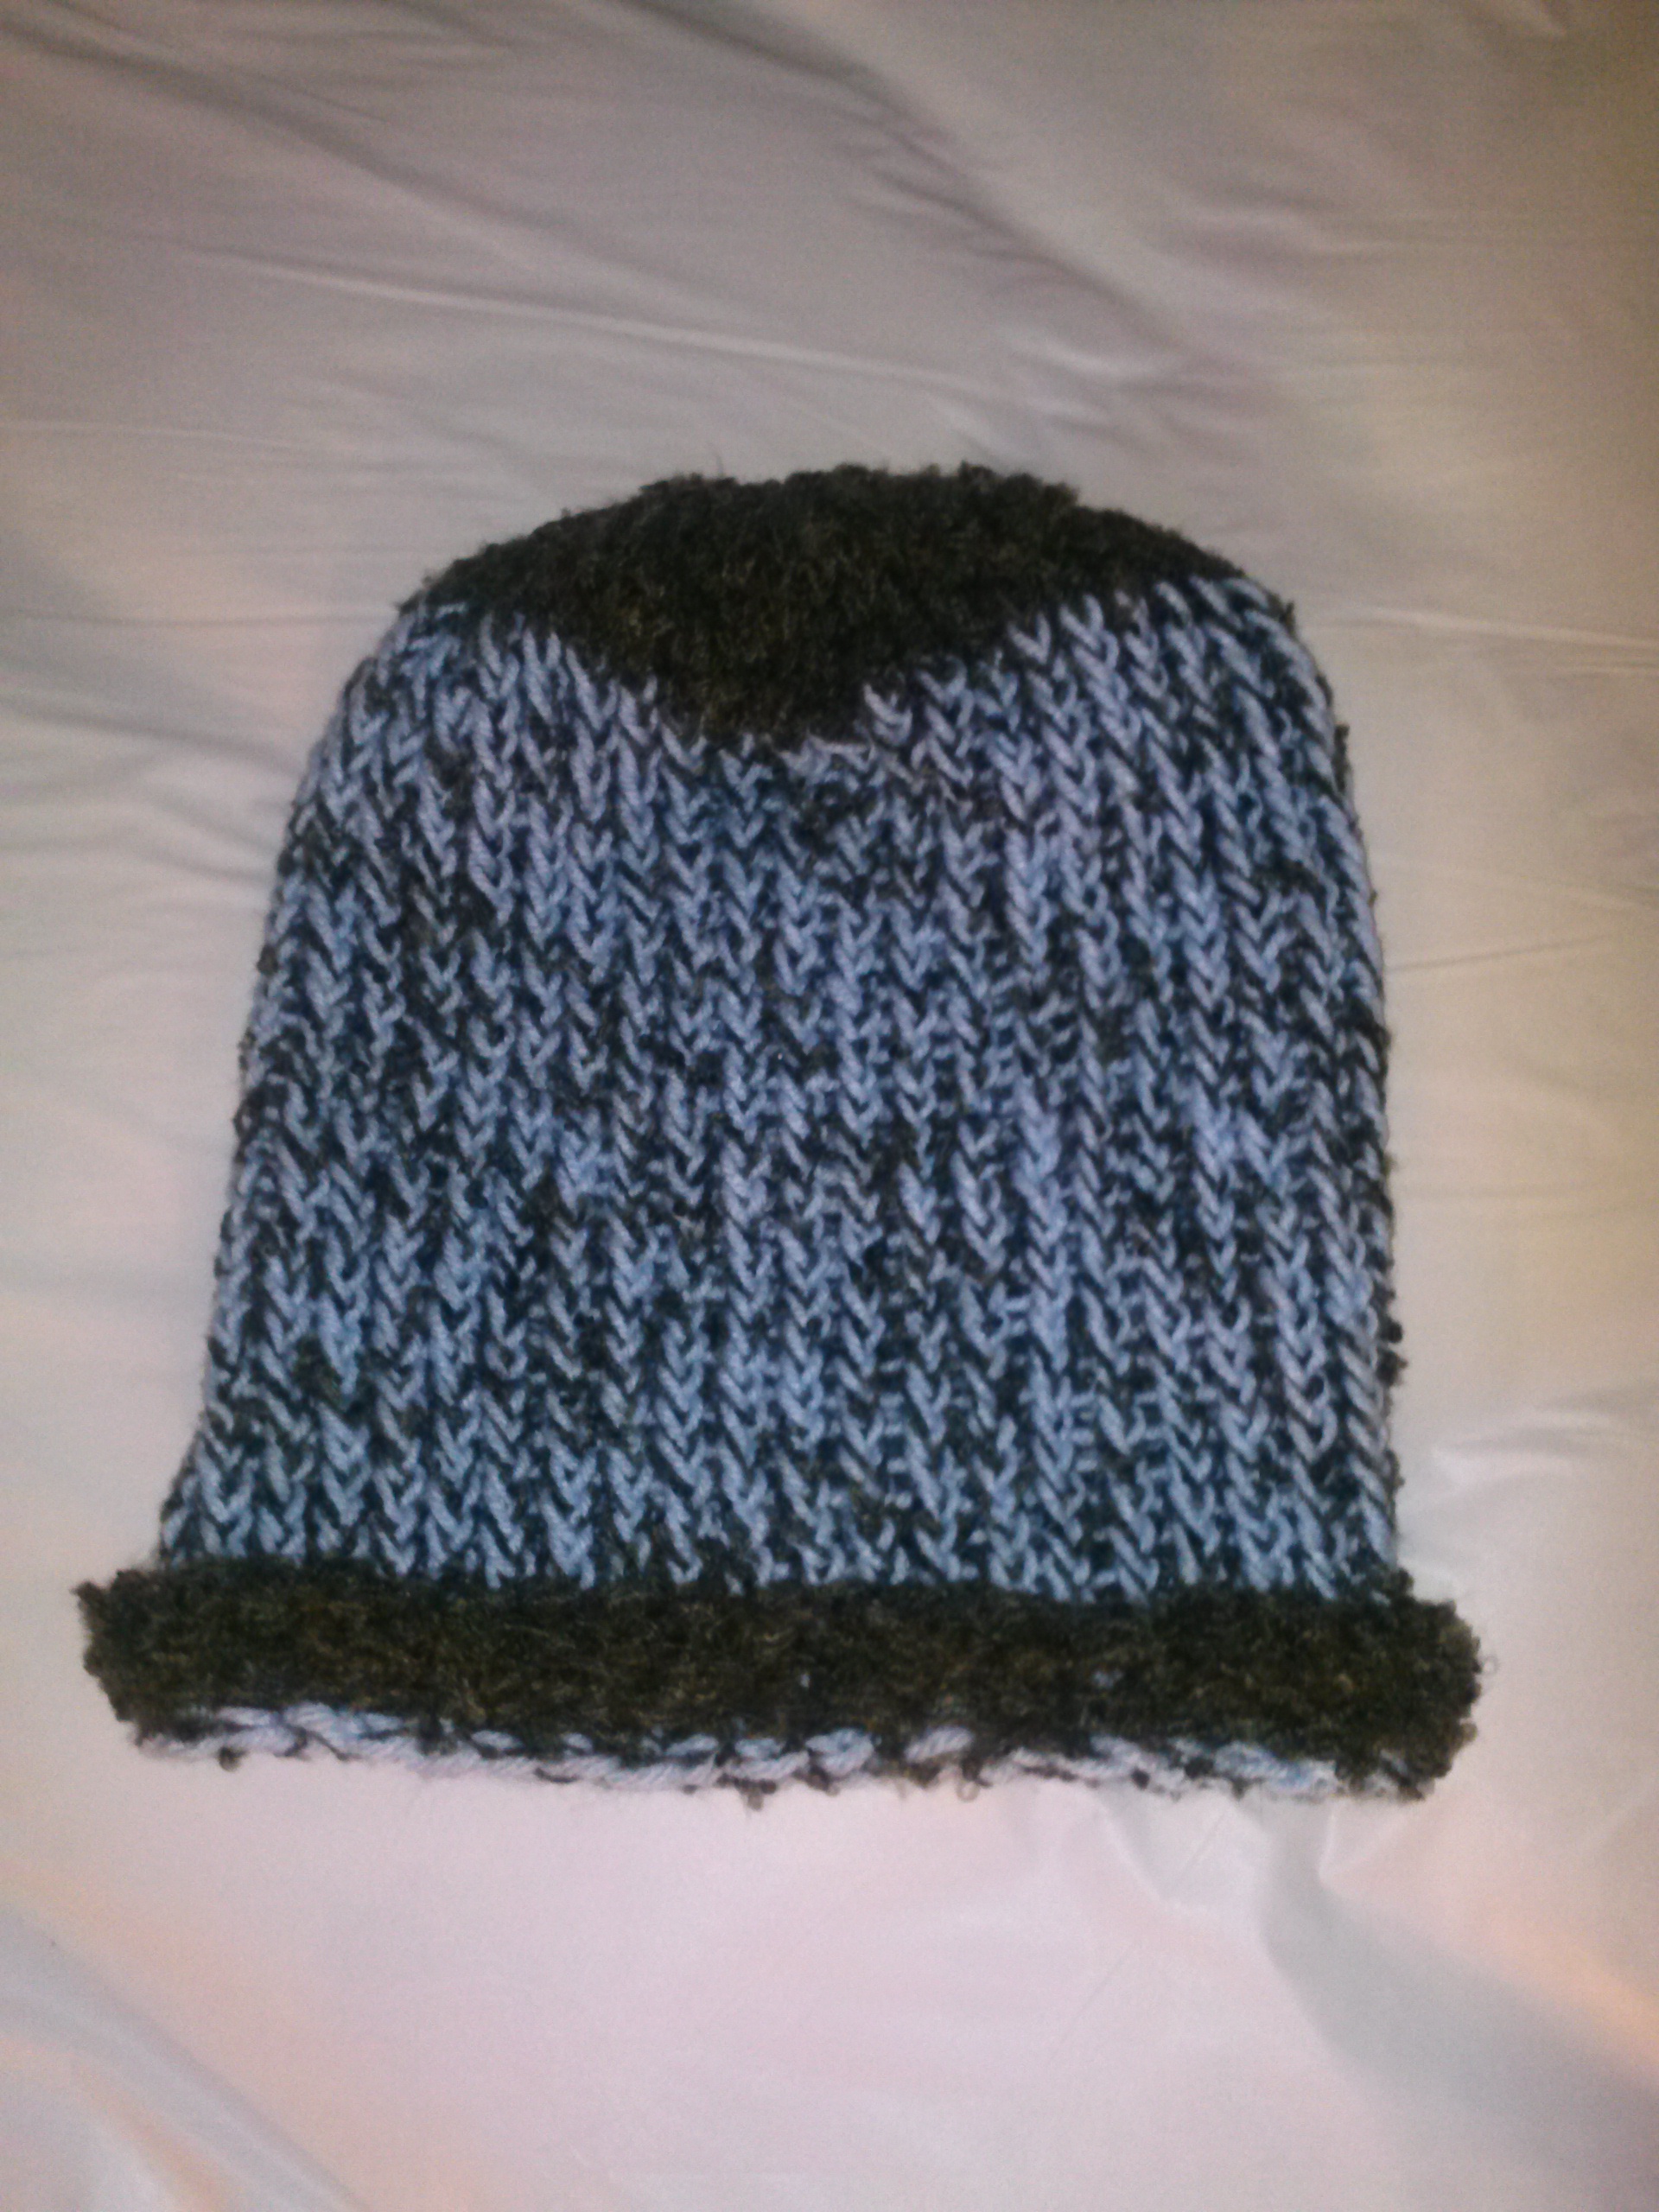 I crocheted this blue slouch hat and I thinking of a new color hat to crochet next.